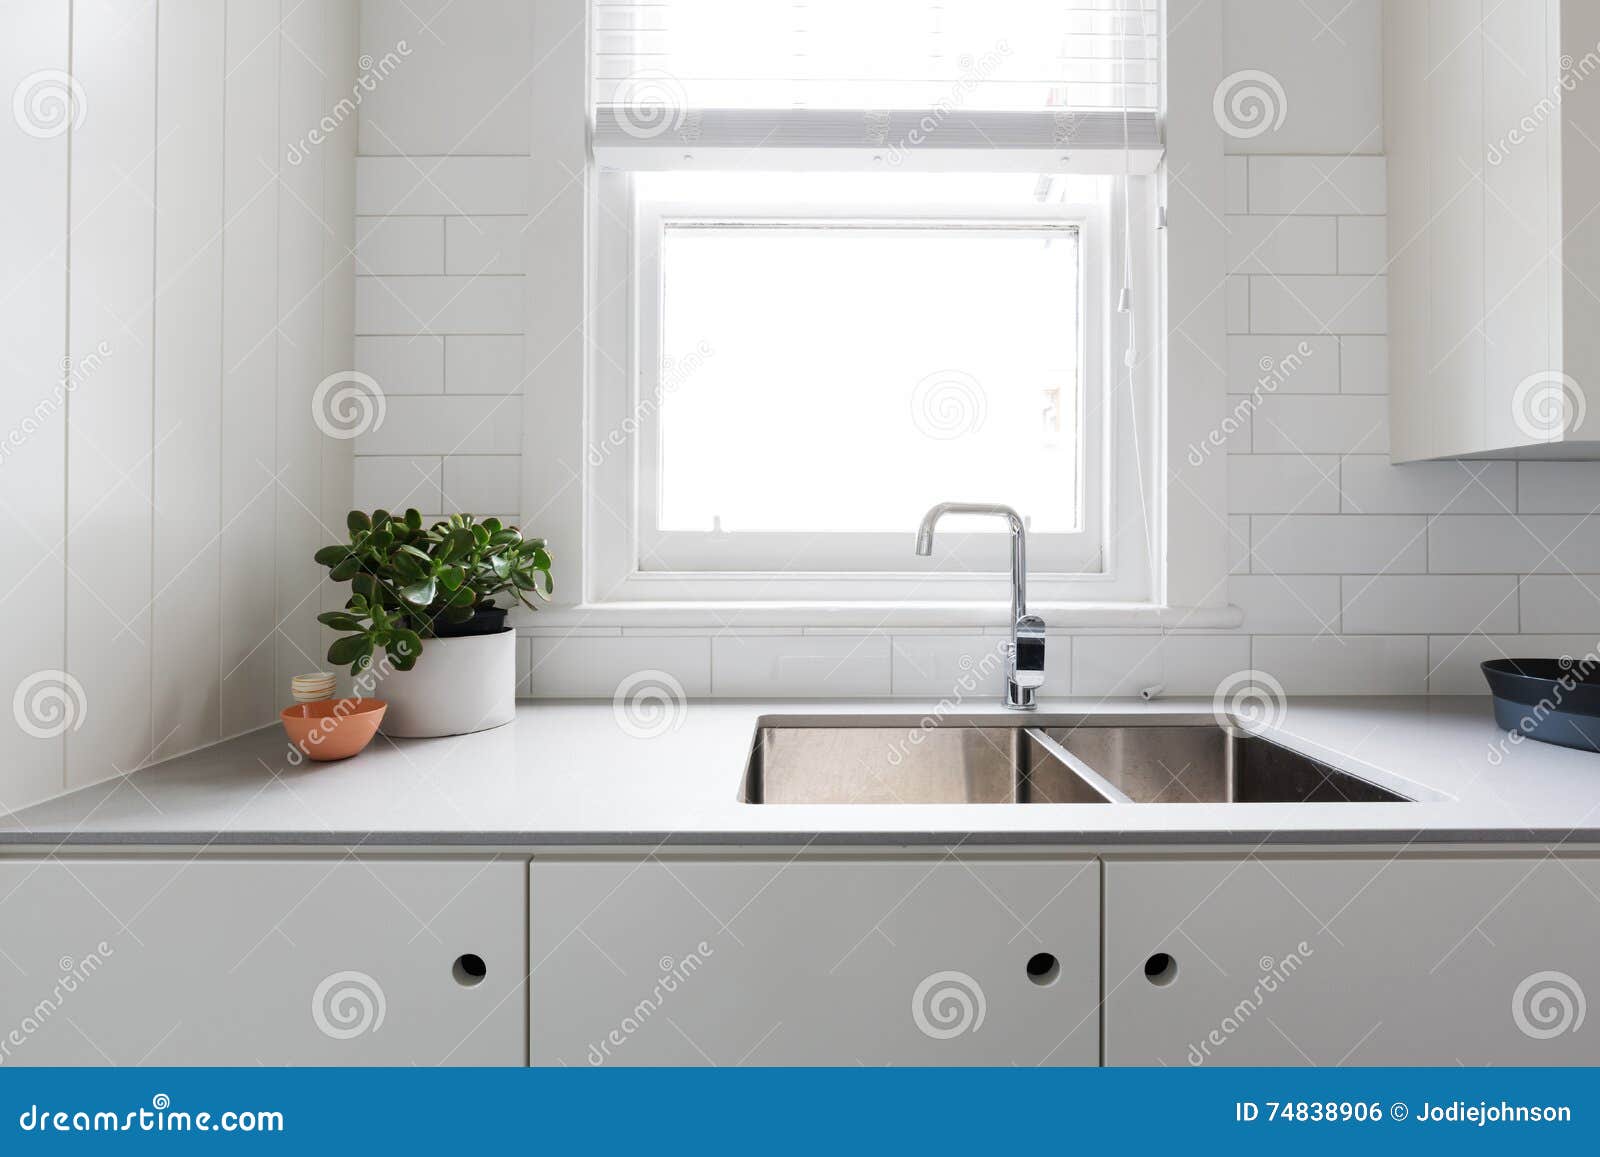 close up details of contemporary white kitchen with subway tiles